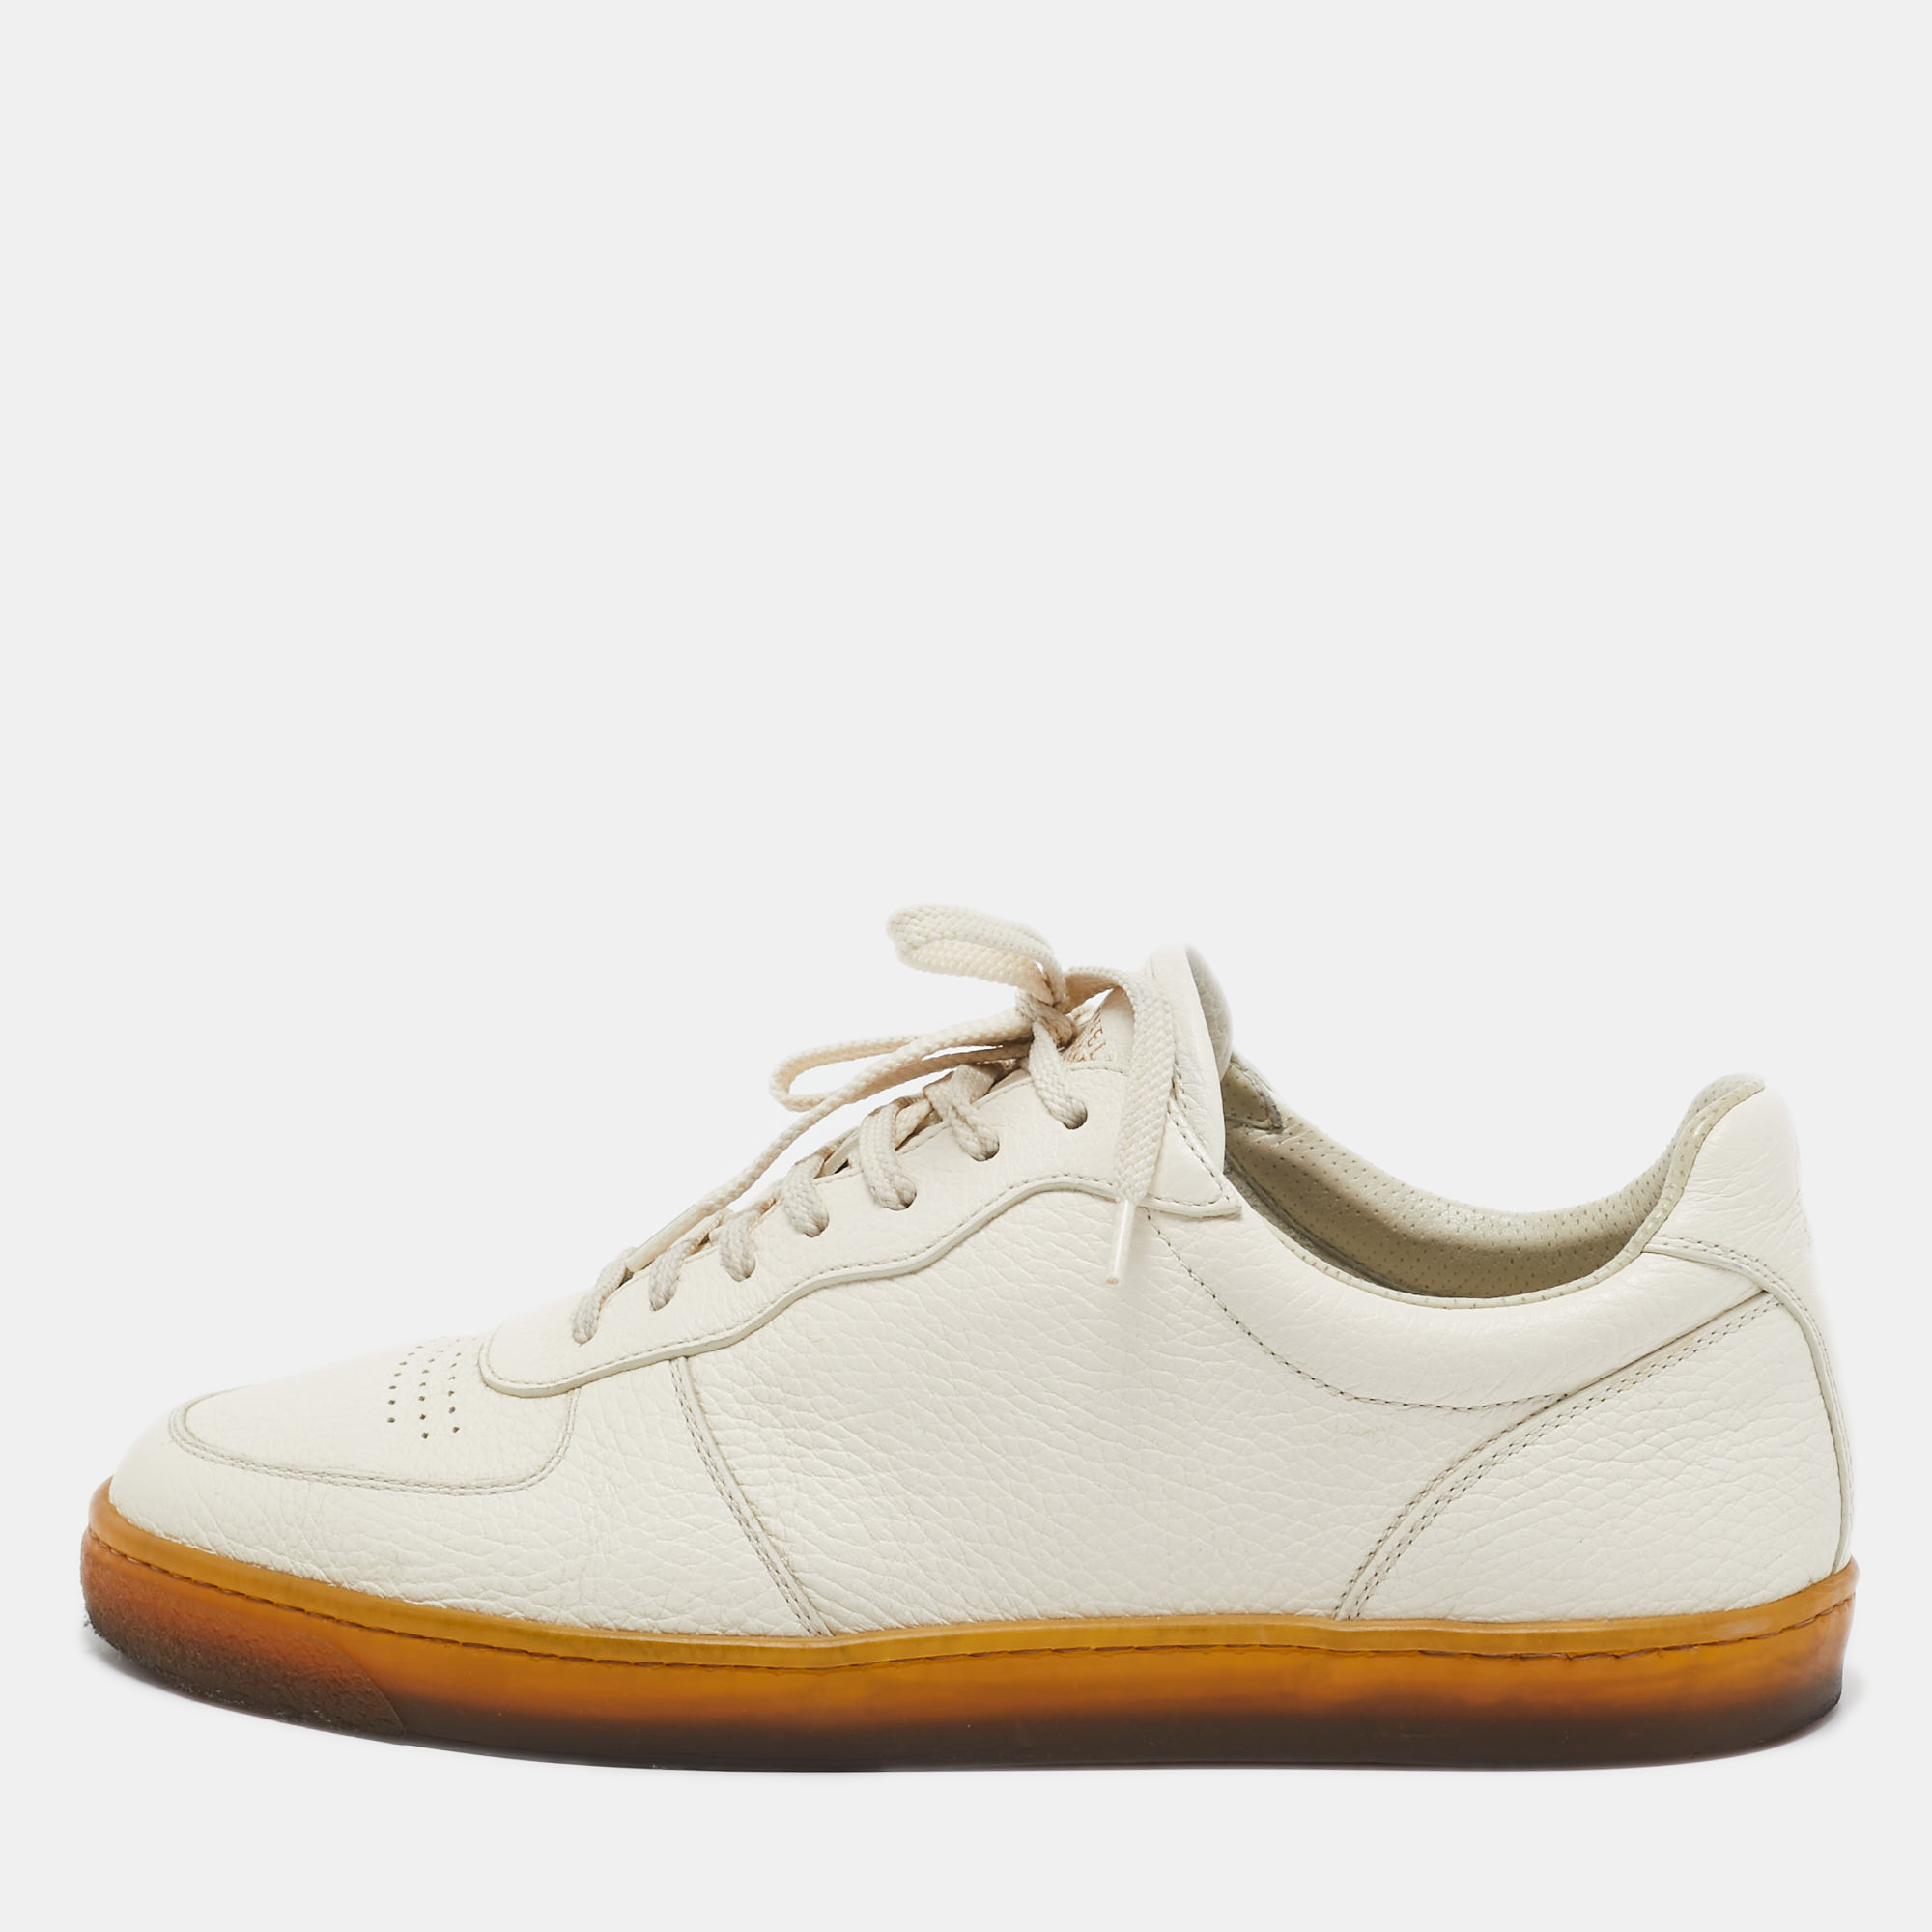 Brunello Cucinelli Cream Leather Low Top Sneakers Size 42